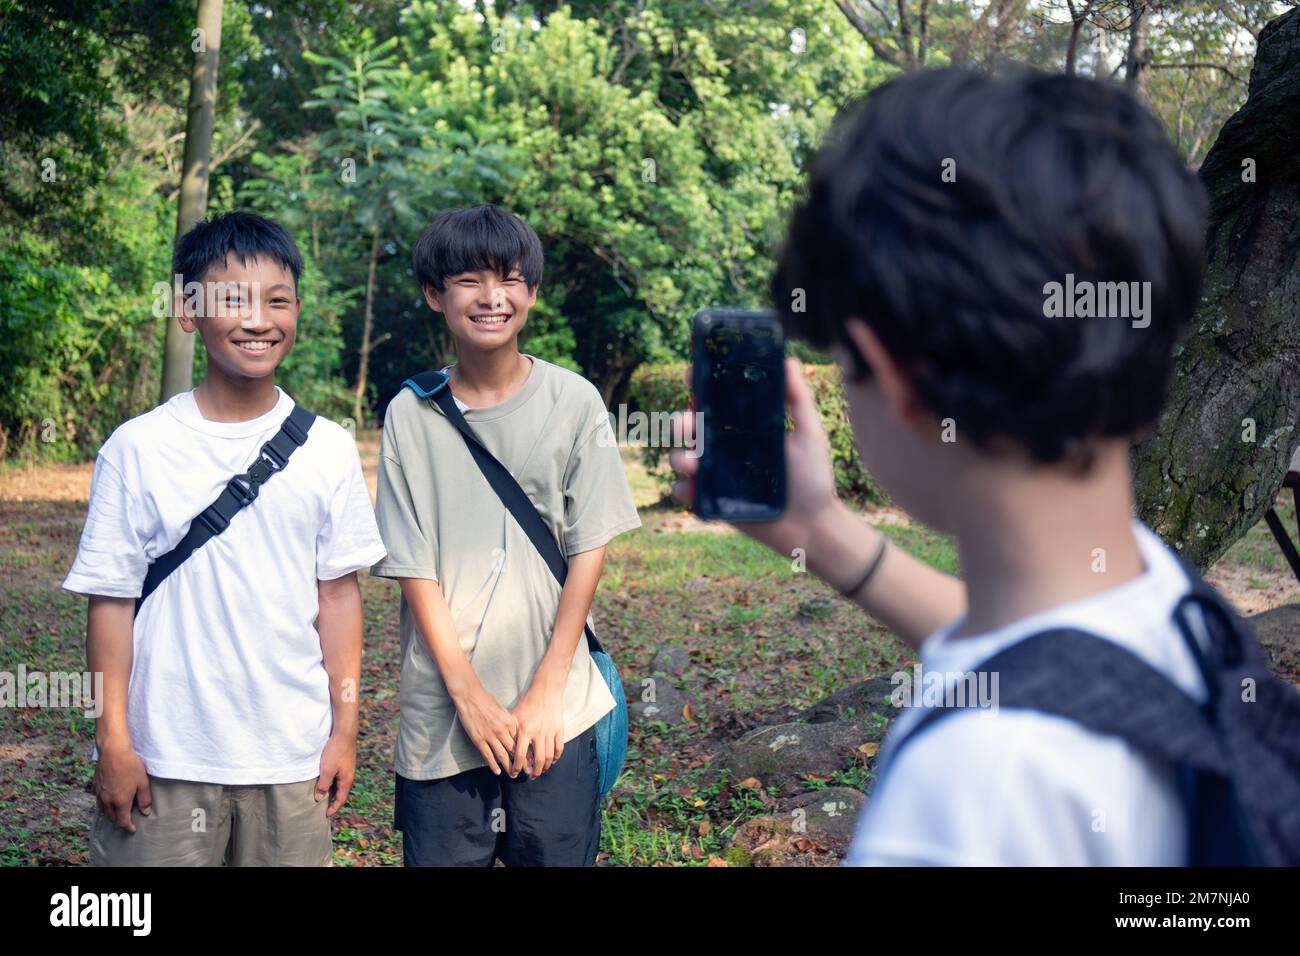 A boy with a mobile phone taking a picture of two 13 year old boys side by side, outdoors in a park in summer. Stock Photo